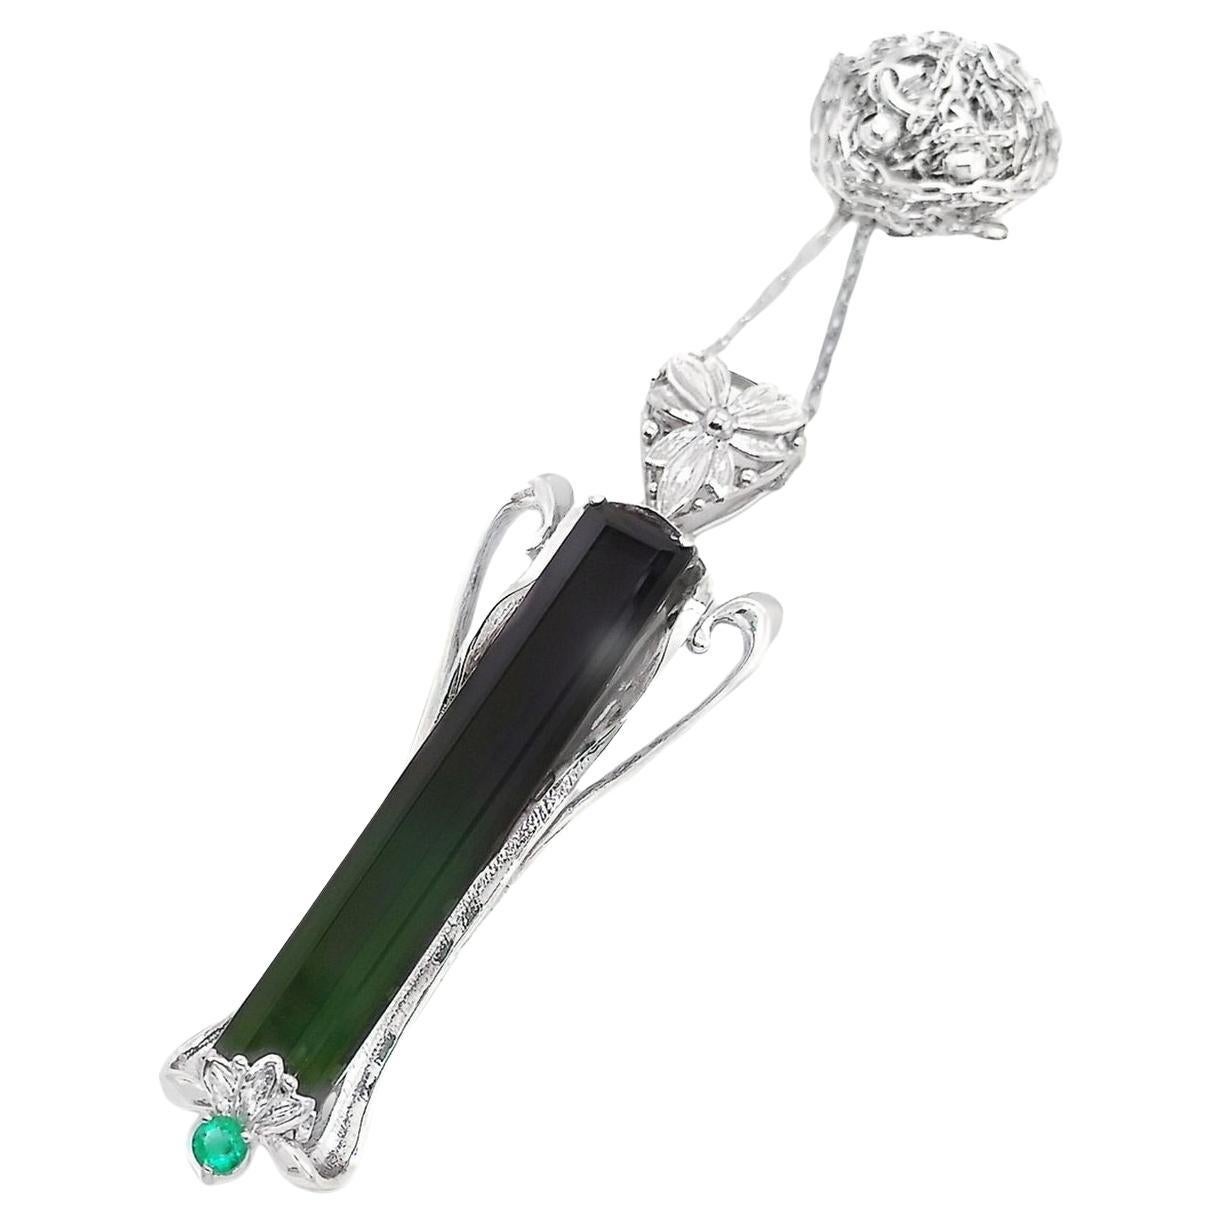 This graceful necklace with pendant from Top Crown Jewelry is a classic, minimalist design which combines a natural green tourmaline with a natural emerald to add the perfect glamour to any look.
The necklace is 44cm long and the pendant size is